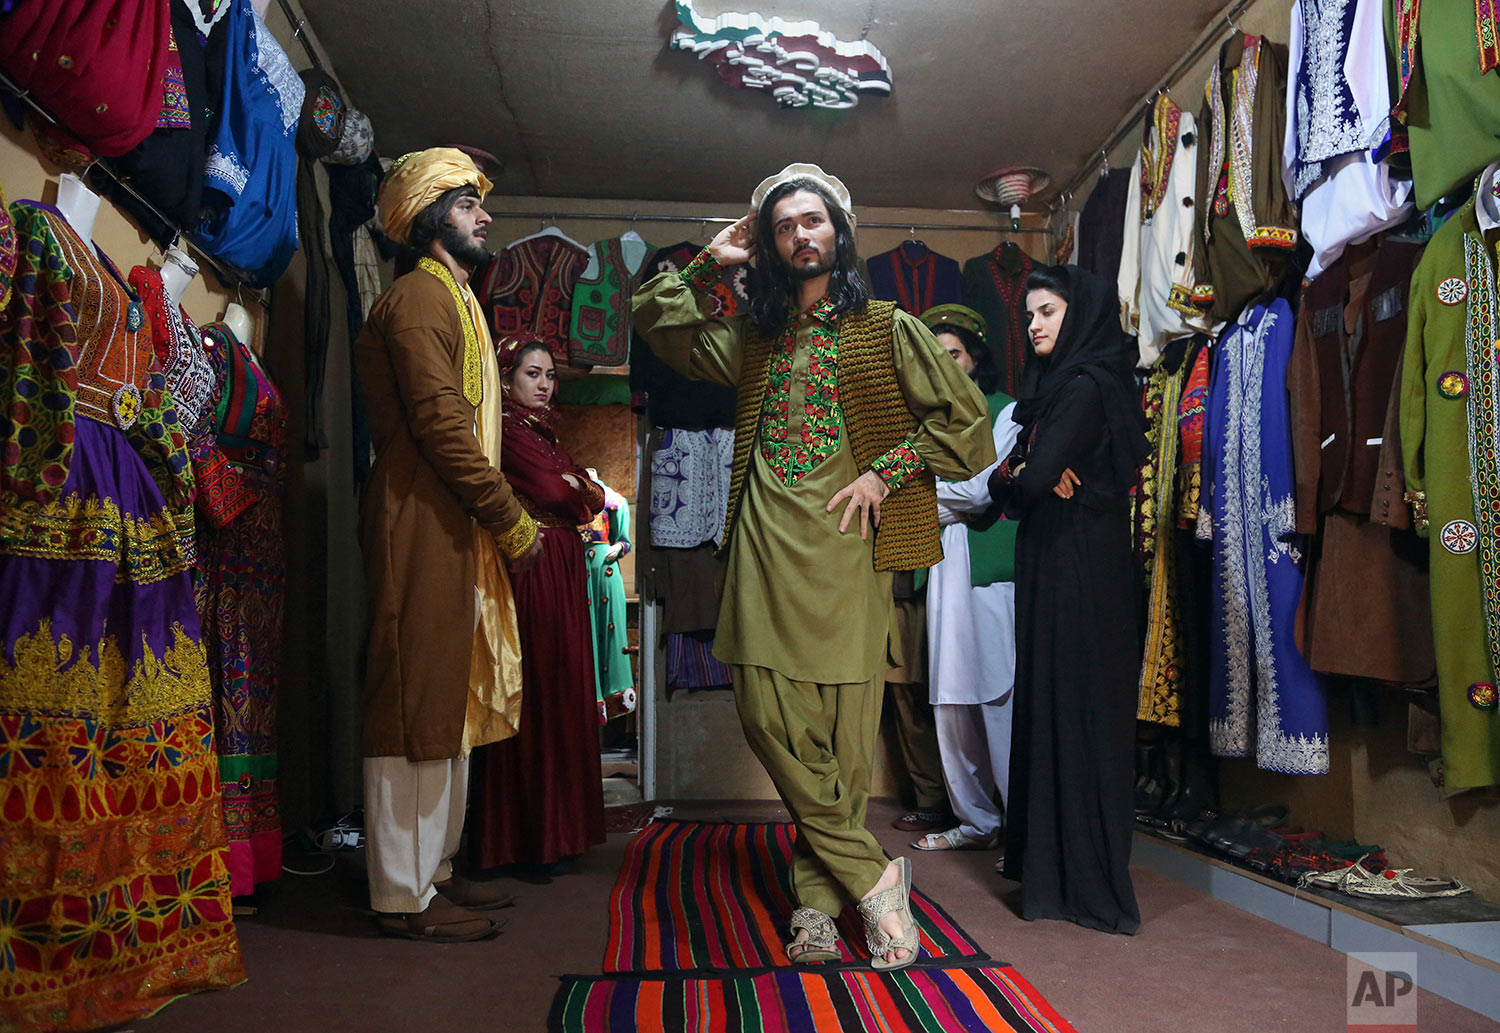  Omid Arman, center, a model for traditional embroidered Afghan clothing, practices modeling, in Kabul, Afghanistan on Aug. 3, 2017. His employer, Ajmal Haqiqi, who hails from the restive Ghazni province, said he exhibits and markets the traditional 